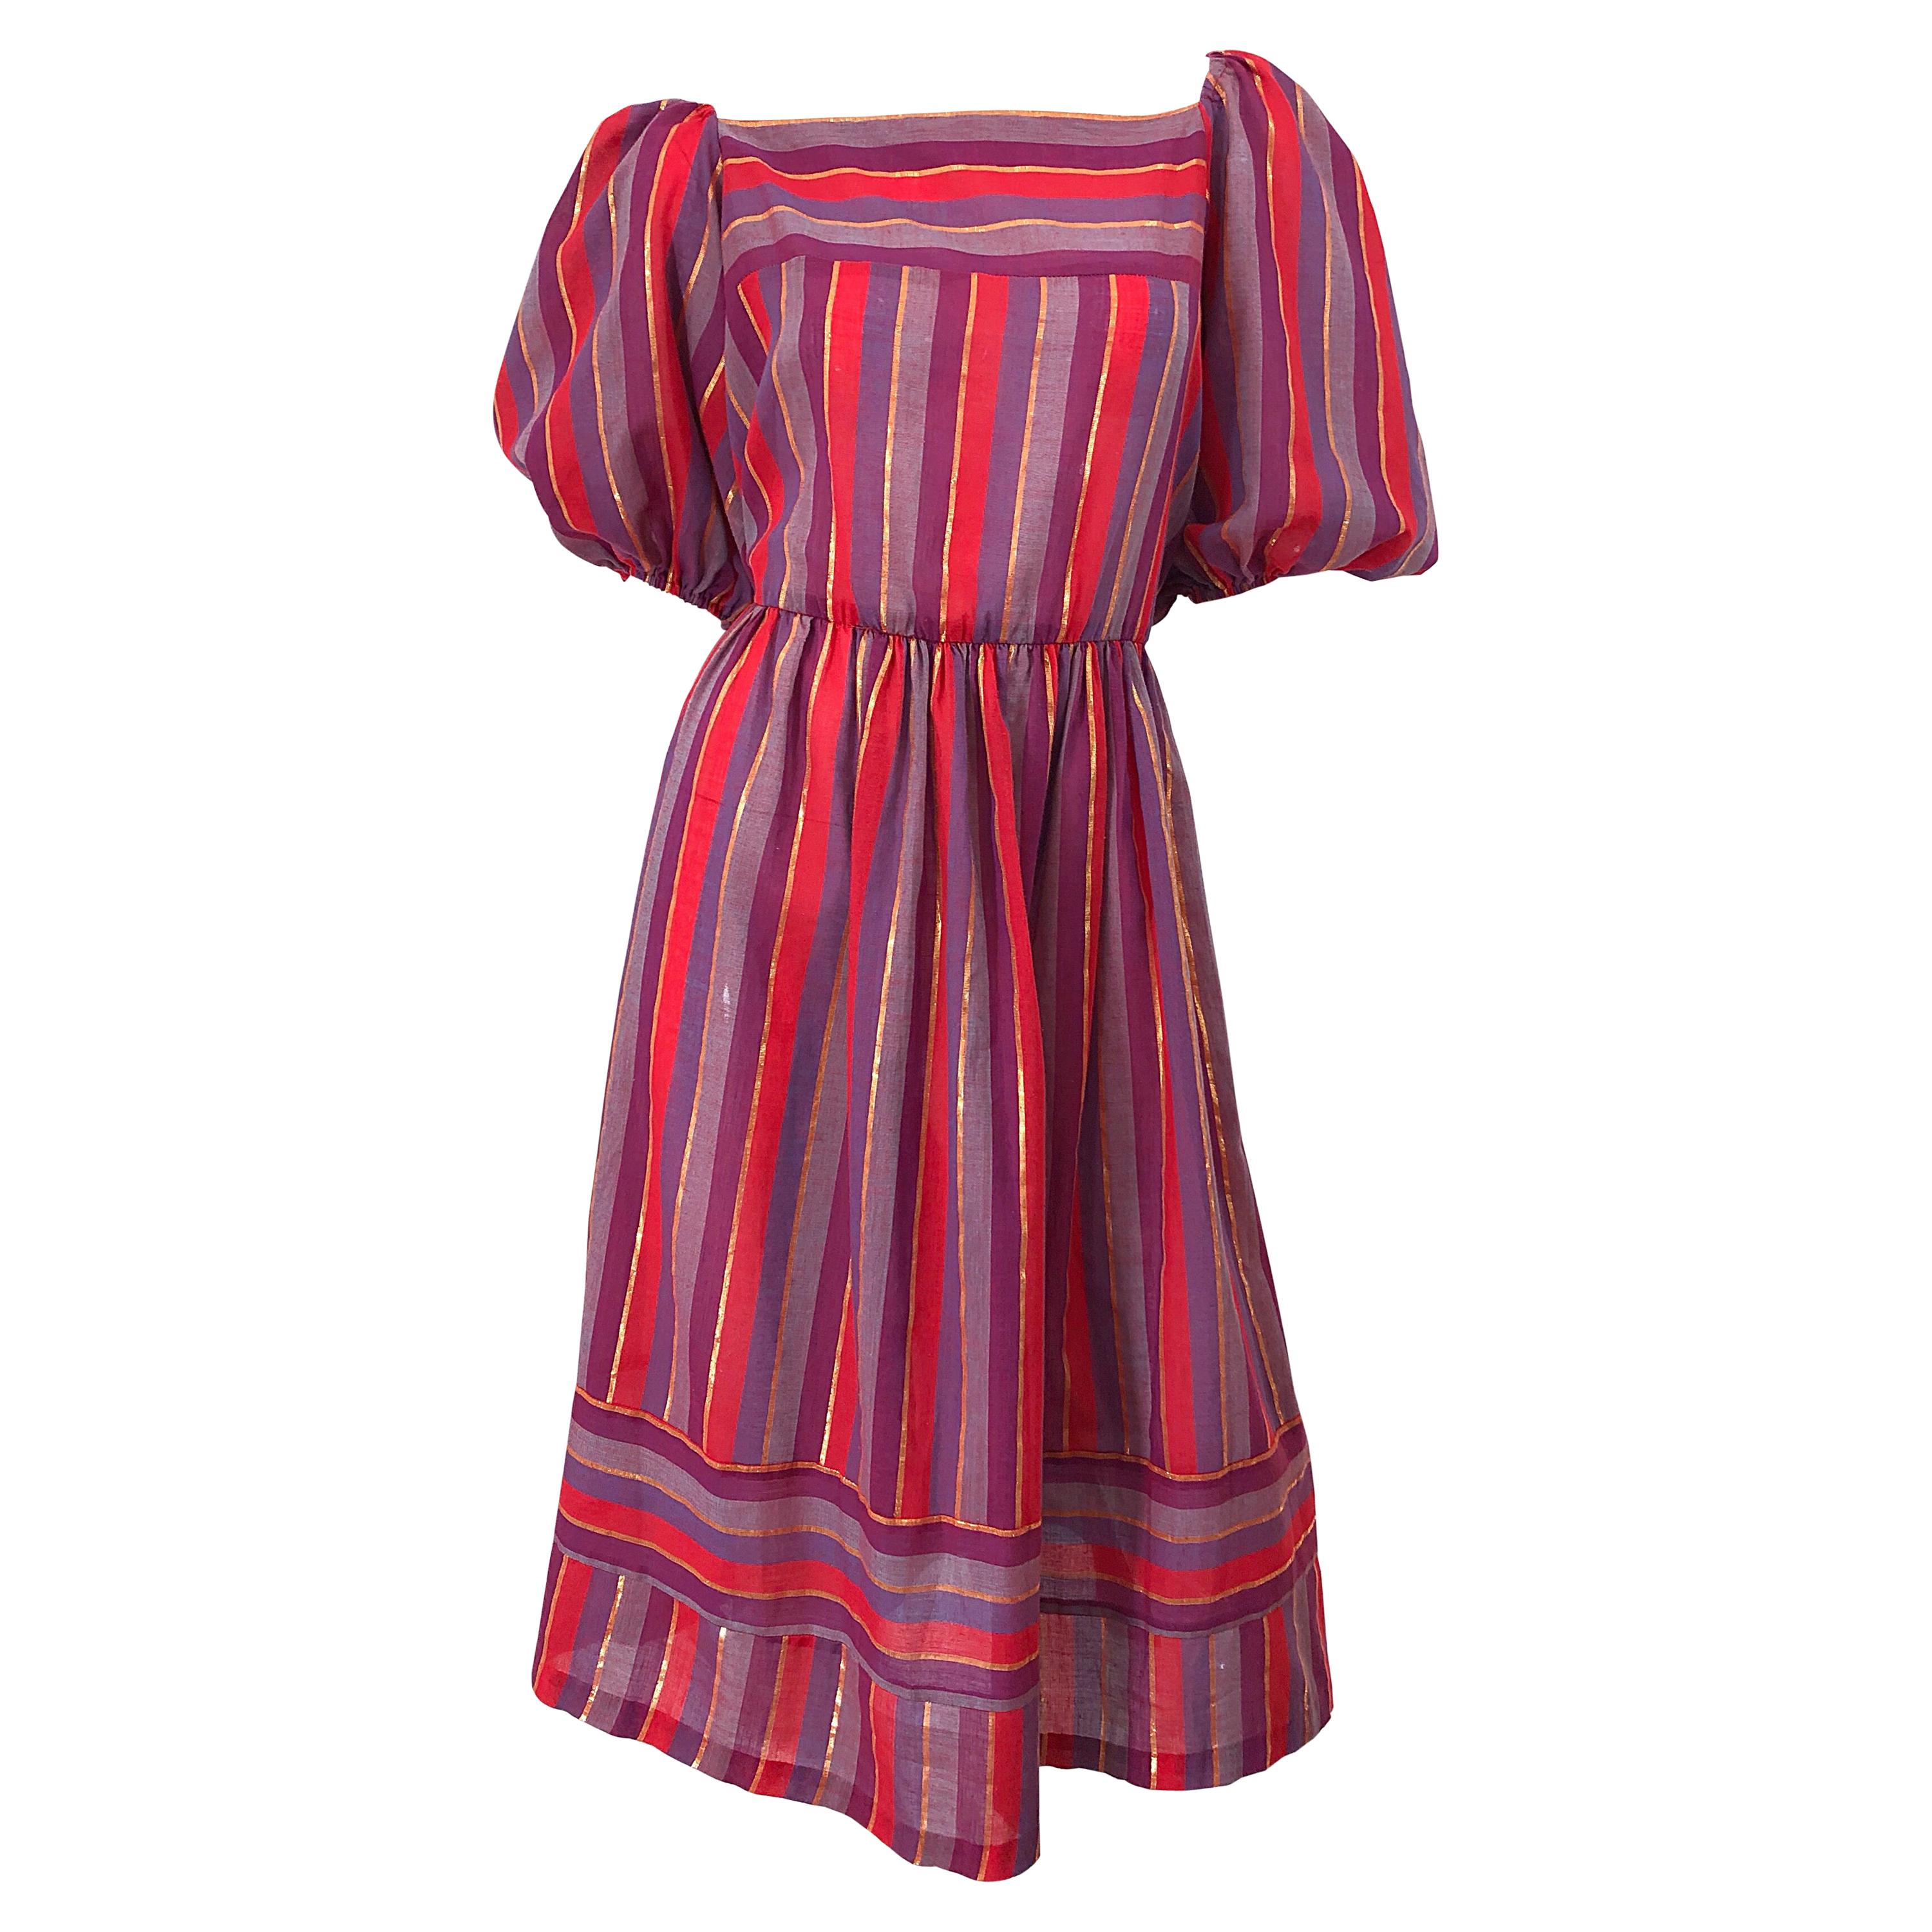 1970s Boho Chic Red + Purple + Gold Striped Cotton Voile 70s Vintage Dress For Sale